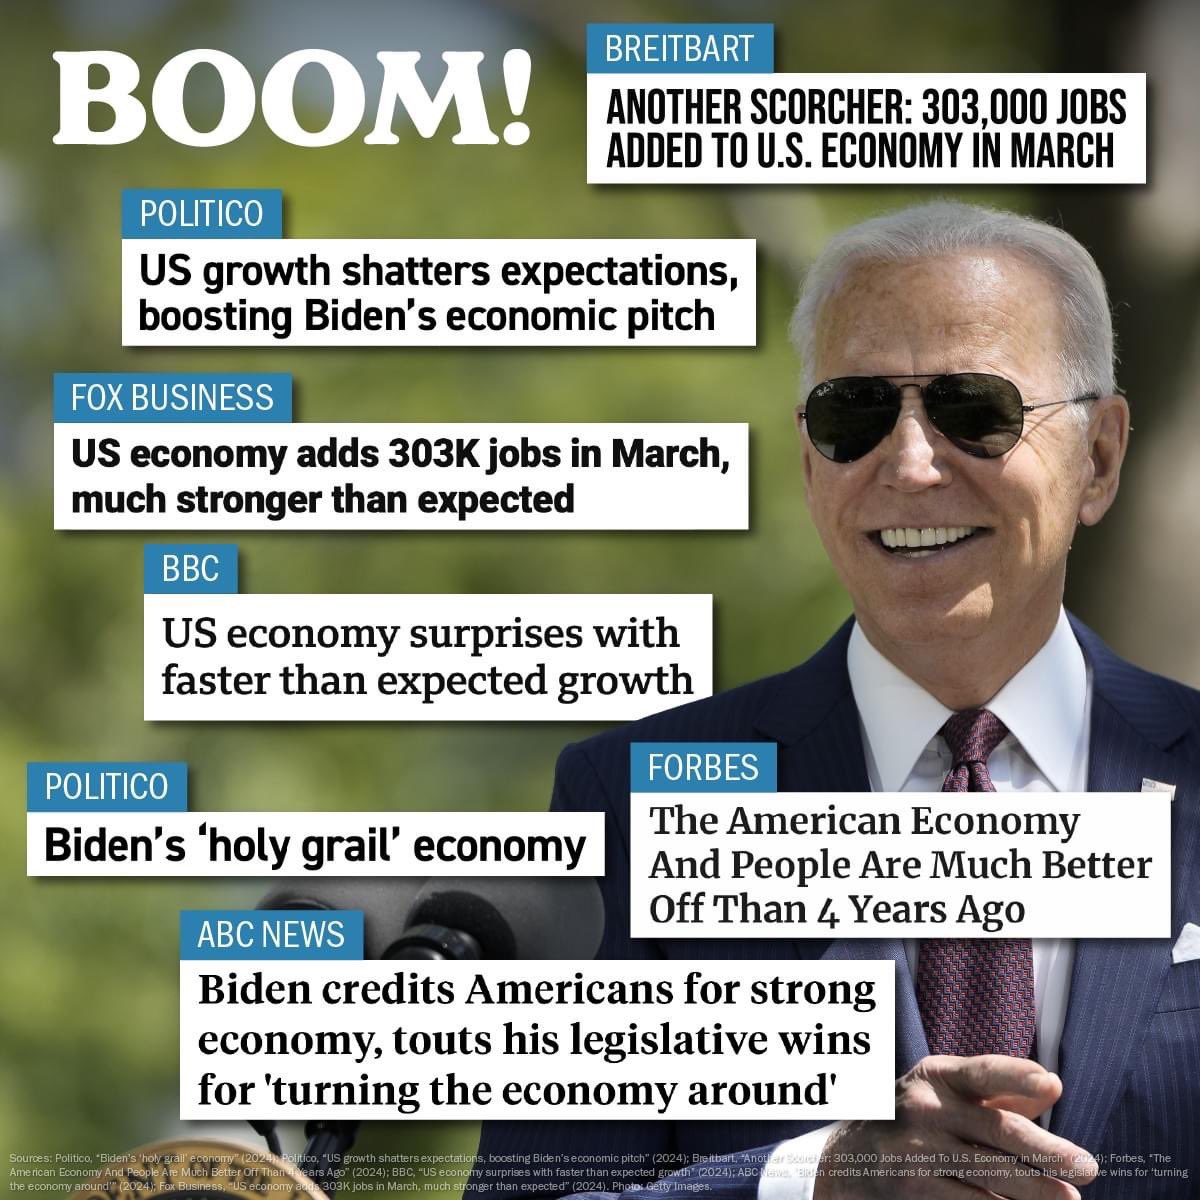 @LaraLeaTrump Bidenomics is working. Donate to Biden and the Democrats. Trump will not improve upon what’s happening, Trump will make things worse. Donate and Vote for Biden and the Democrats